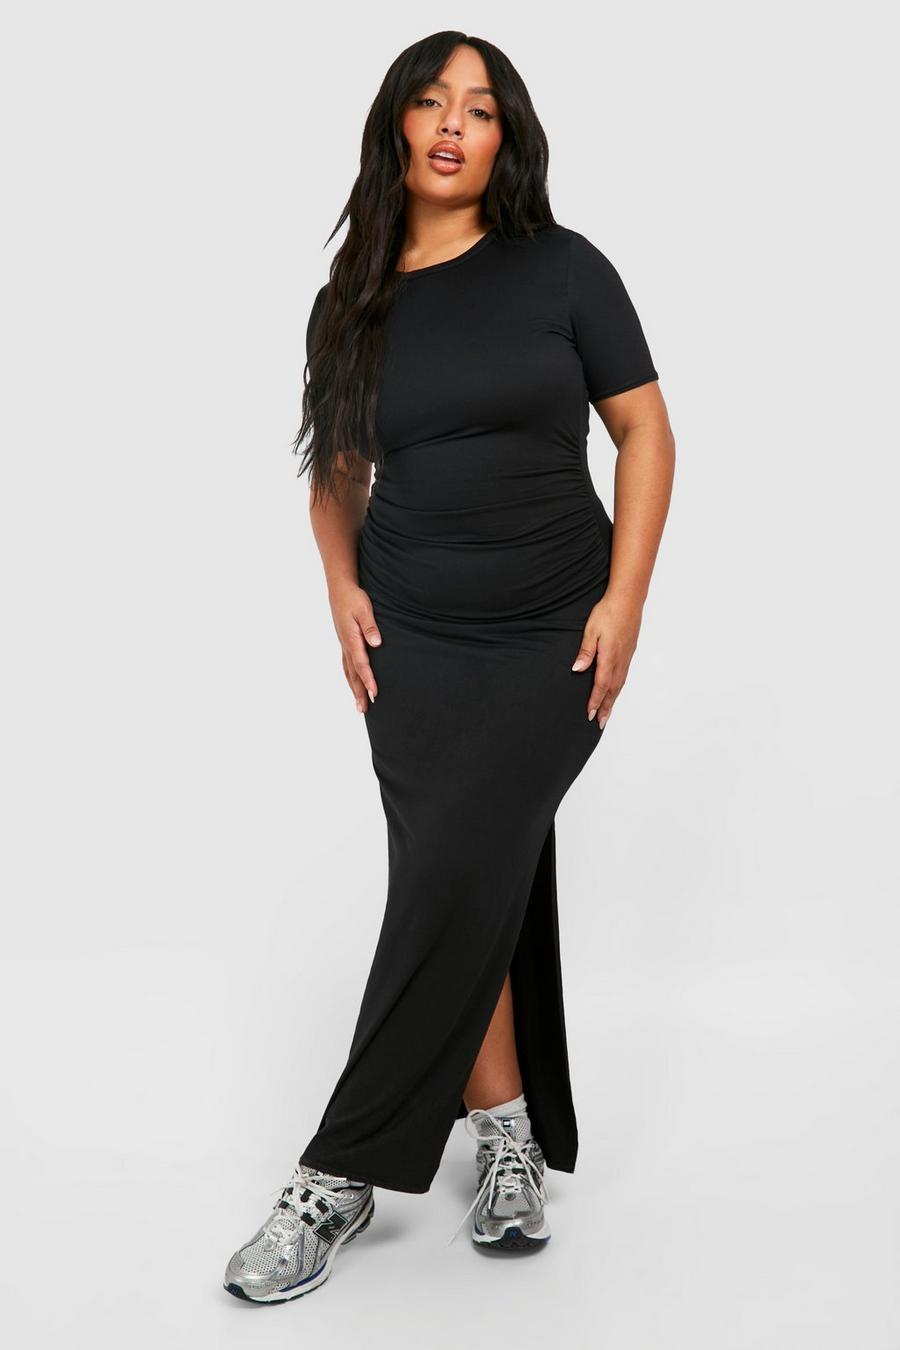 Chic super plus size clothing In A Variety Of Stylish Designs